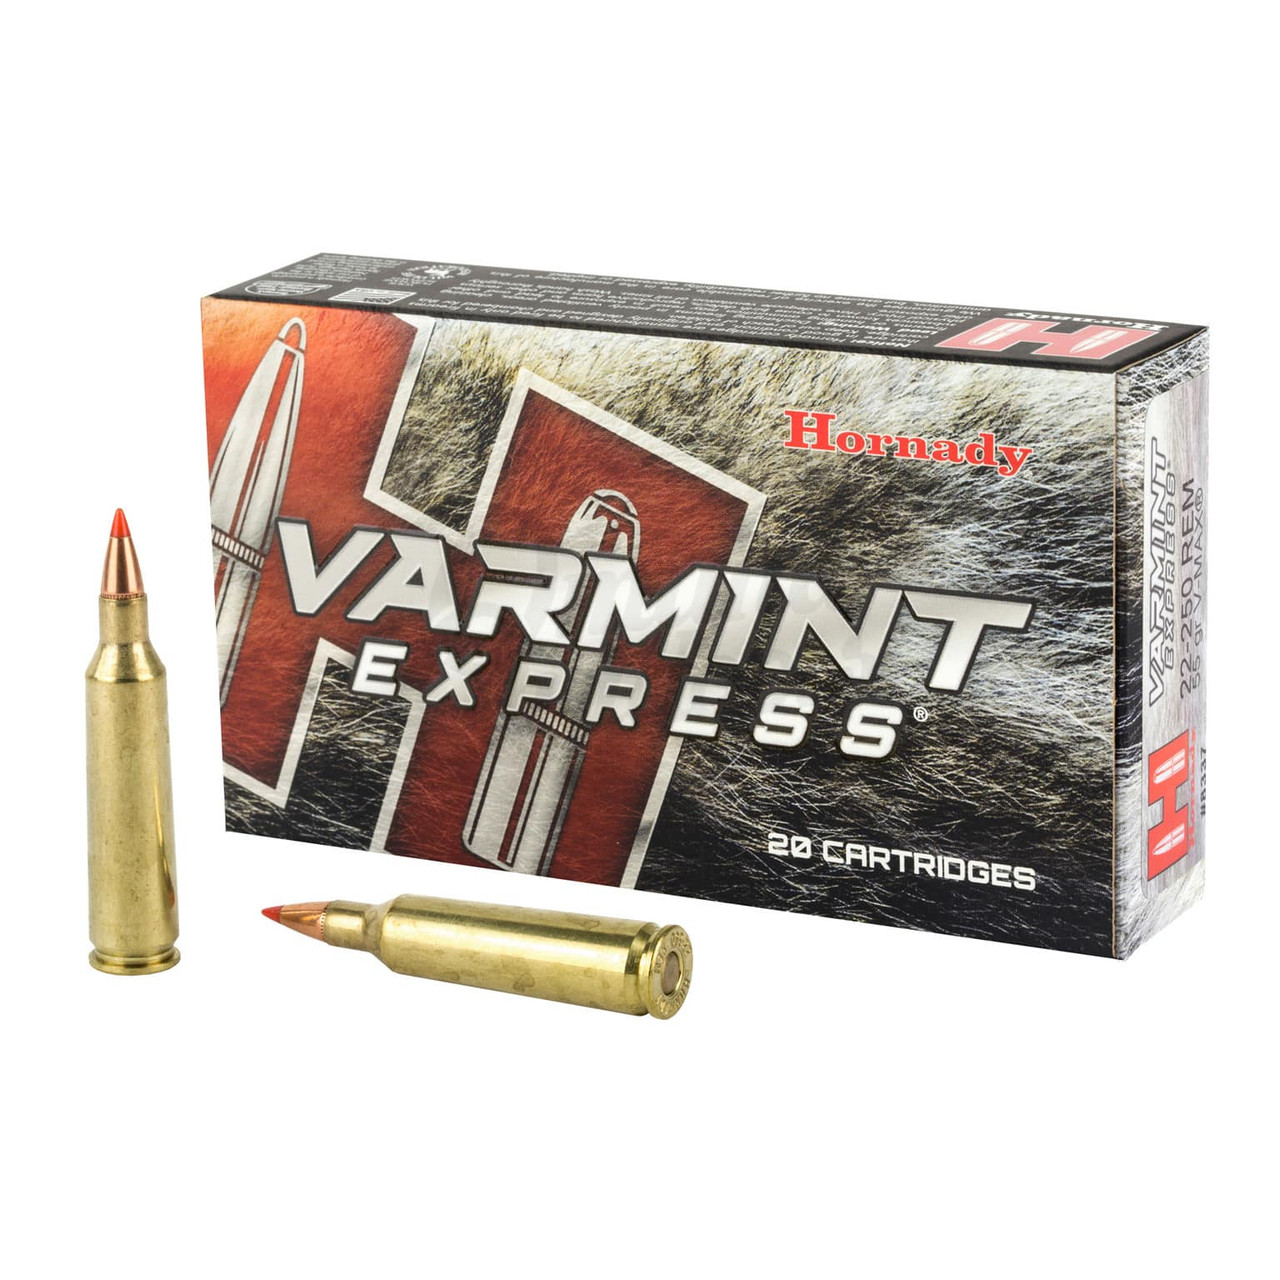 Product Description
Varmints everywhere shudder to think that a Hornady Varmint Express 22-250 Remington 55gr V-MAX might be waiting for them to pop their head out. But it isn’t just varmints that live in fear of this blazing fast, high-potency ammo – it’s a perfect 400+ yard coyote cartridge too. The V-MAX projectile expands much better than the light grain weight might dictate – leading to devastating impacts on small and medium game animals. Speed and top-shelf ballistics make the Hornady 55 grain 22-250 Varmint Express cartridge a precision tactical solution. Omaha Outdoors offers this speedy cartridge in a 20 round box.

Product Specifications
Manufacturer:Hornady
Model:Varmint Express
Bullet Type:V-MAX
Caliber:22-250 Remington
Grain Weight:55
Units Per Box:20
MPN:8337
 